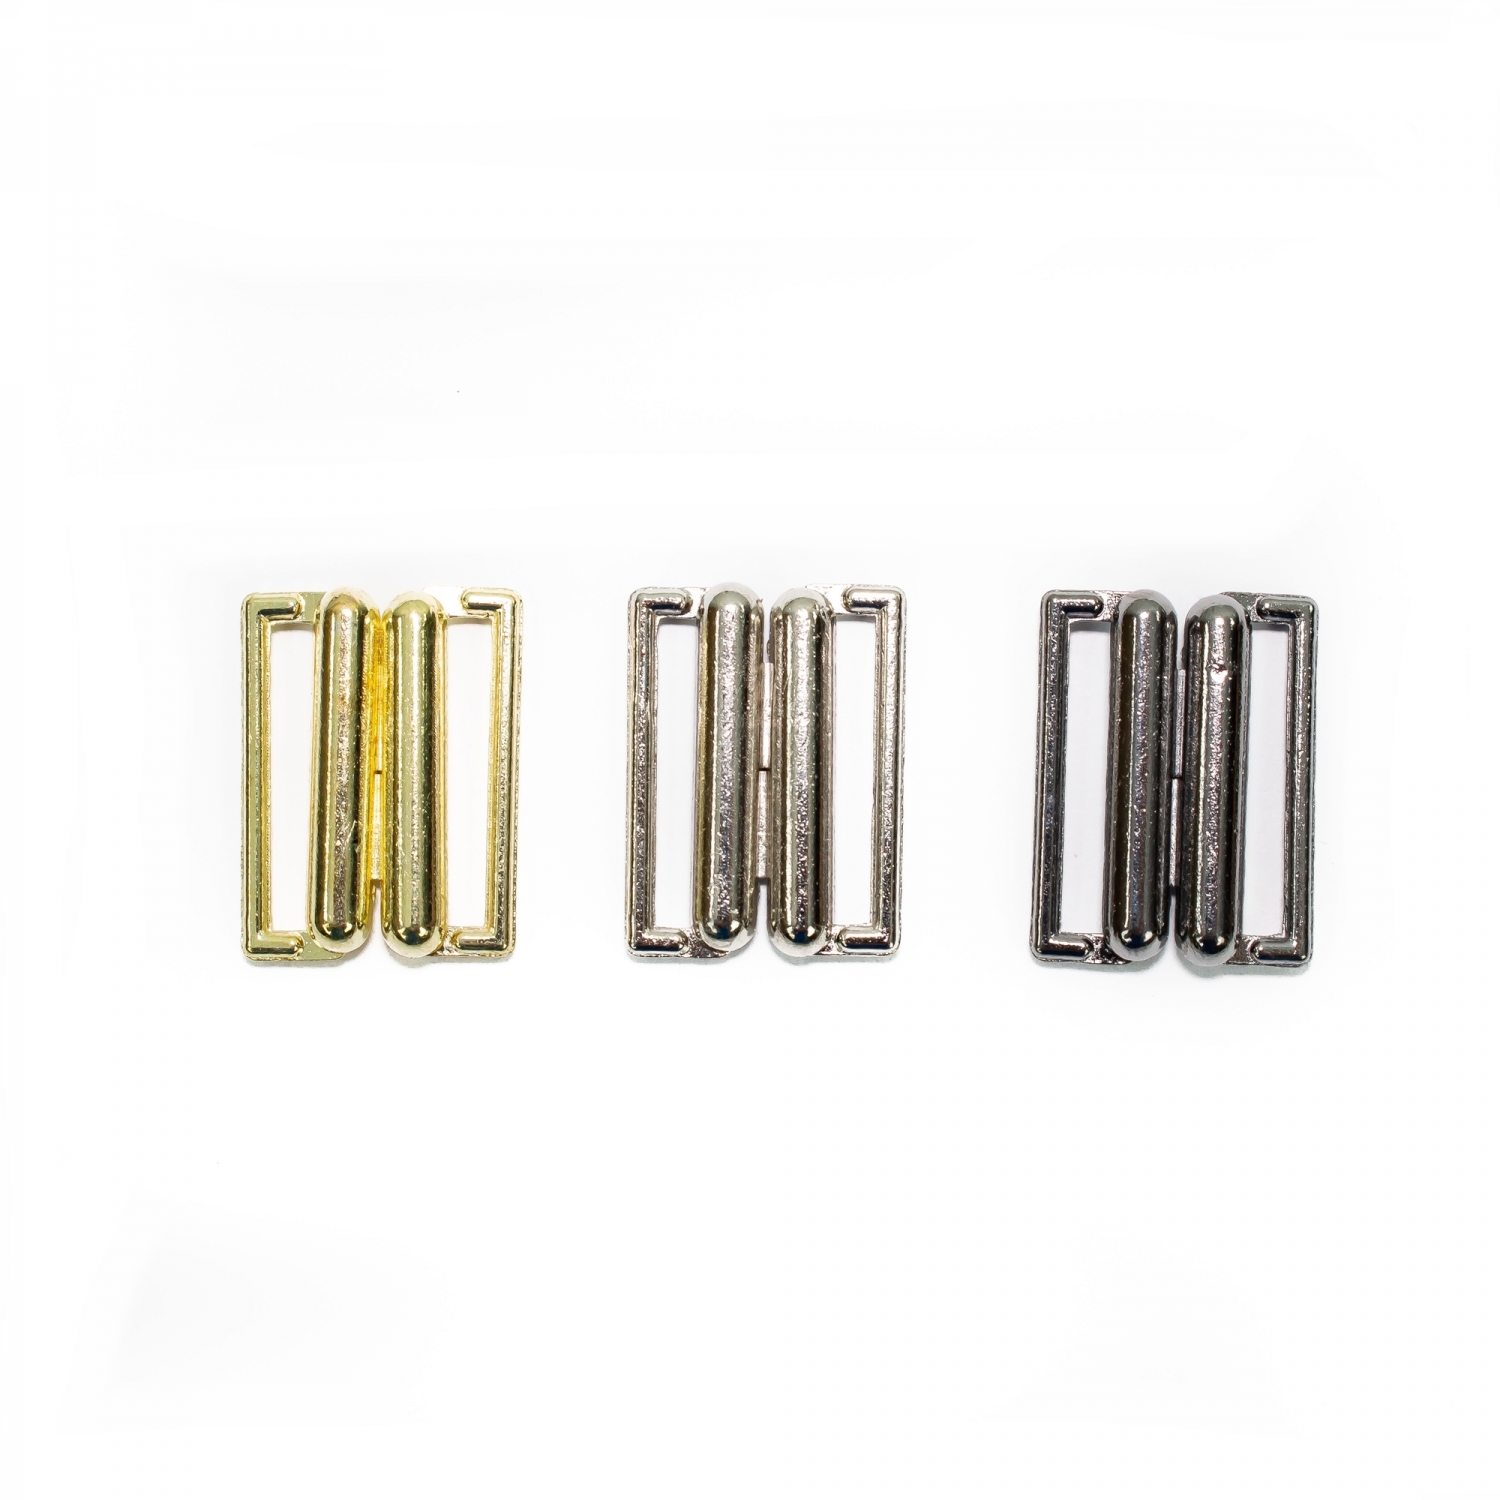 Bra Clasps from Metal, 14 mm (100 pairs/pack)Code: MGT14